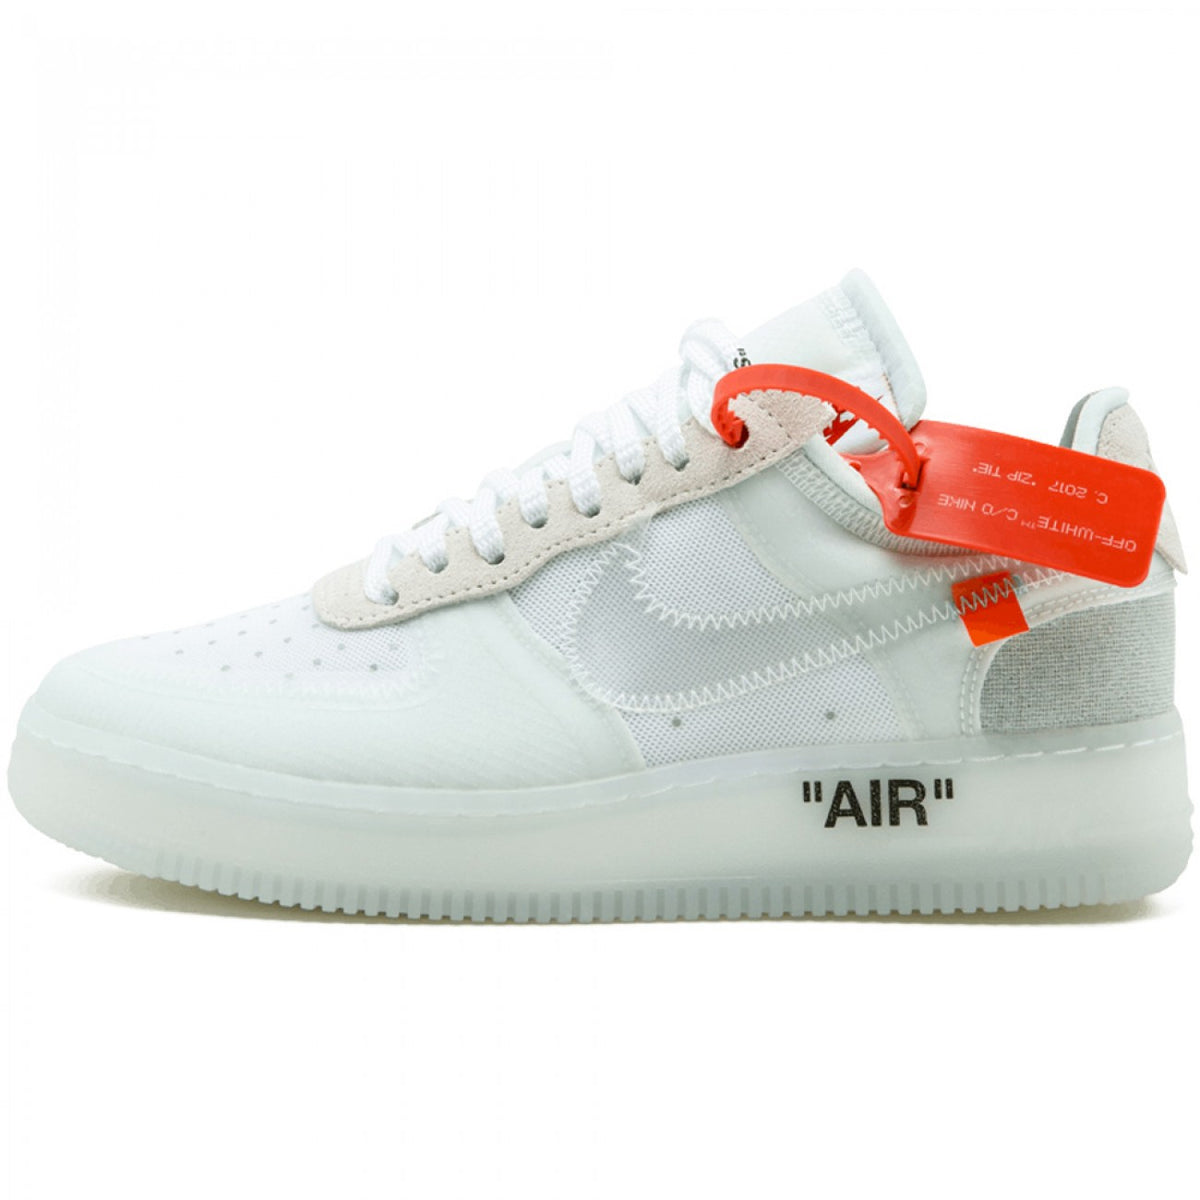 off white air force 1s